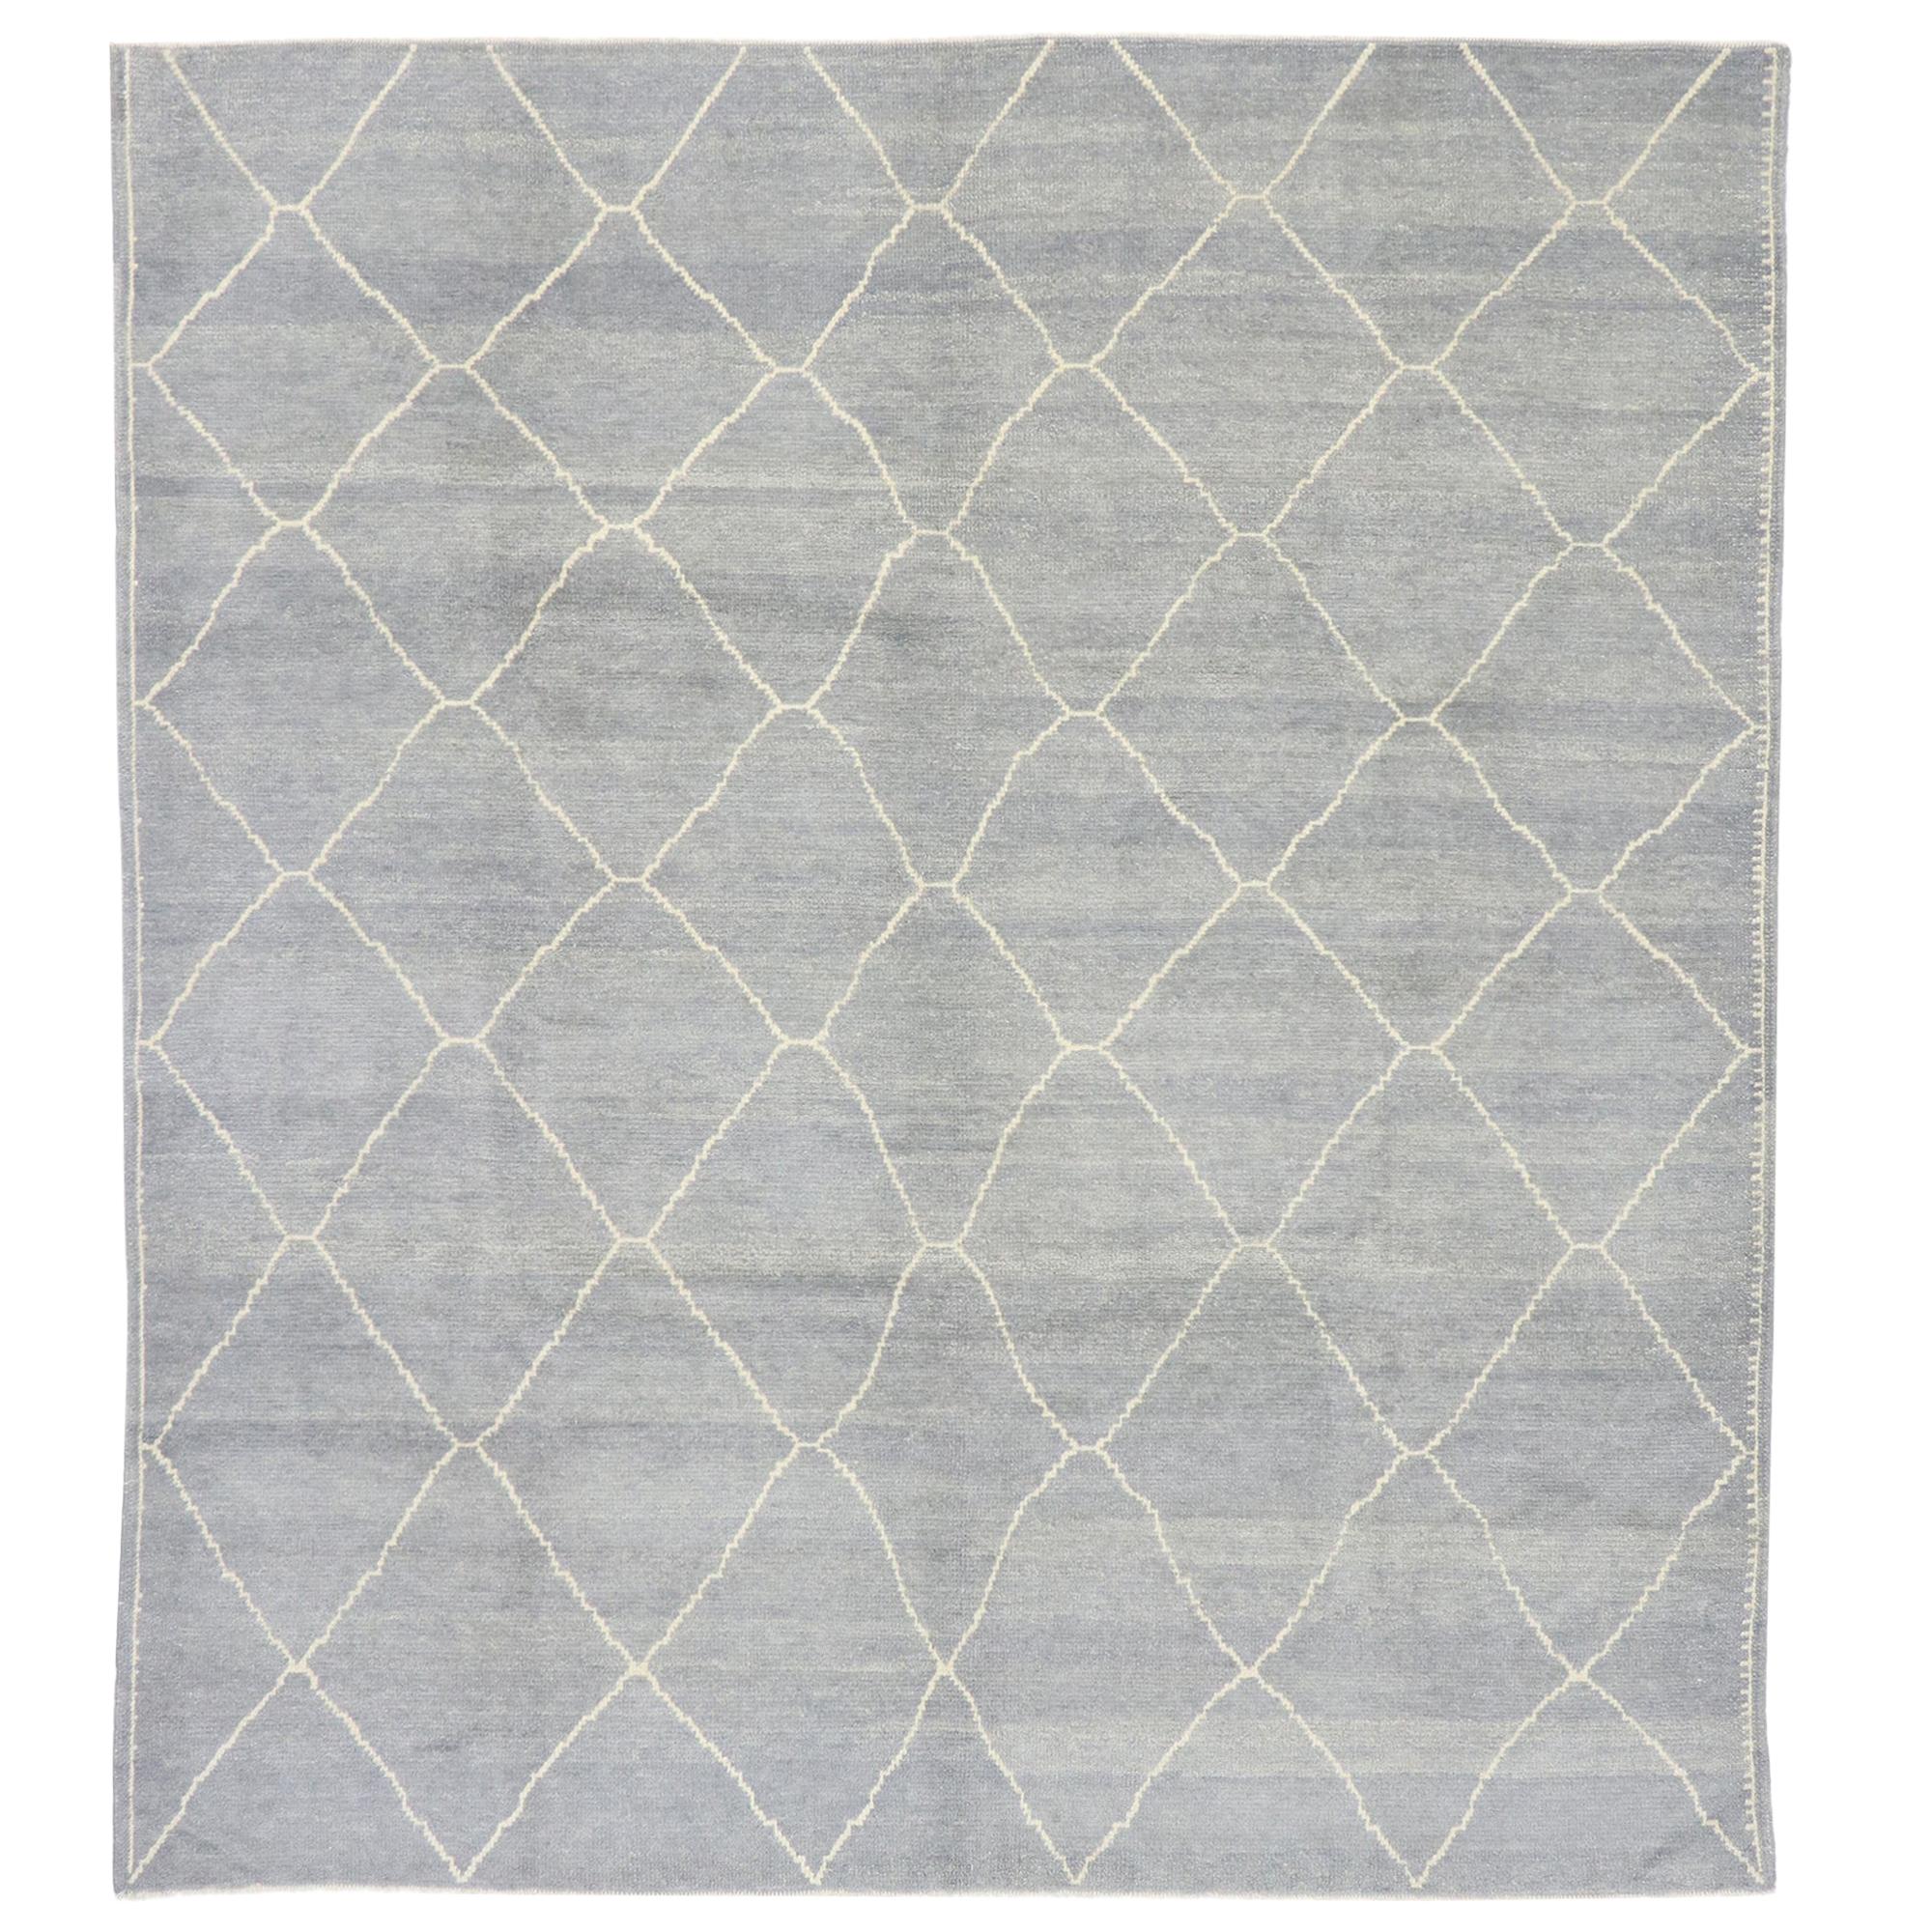 New Contemporary Gray Moroccan Style Rug with Modern Trellis Design